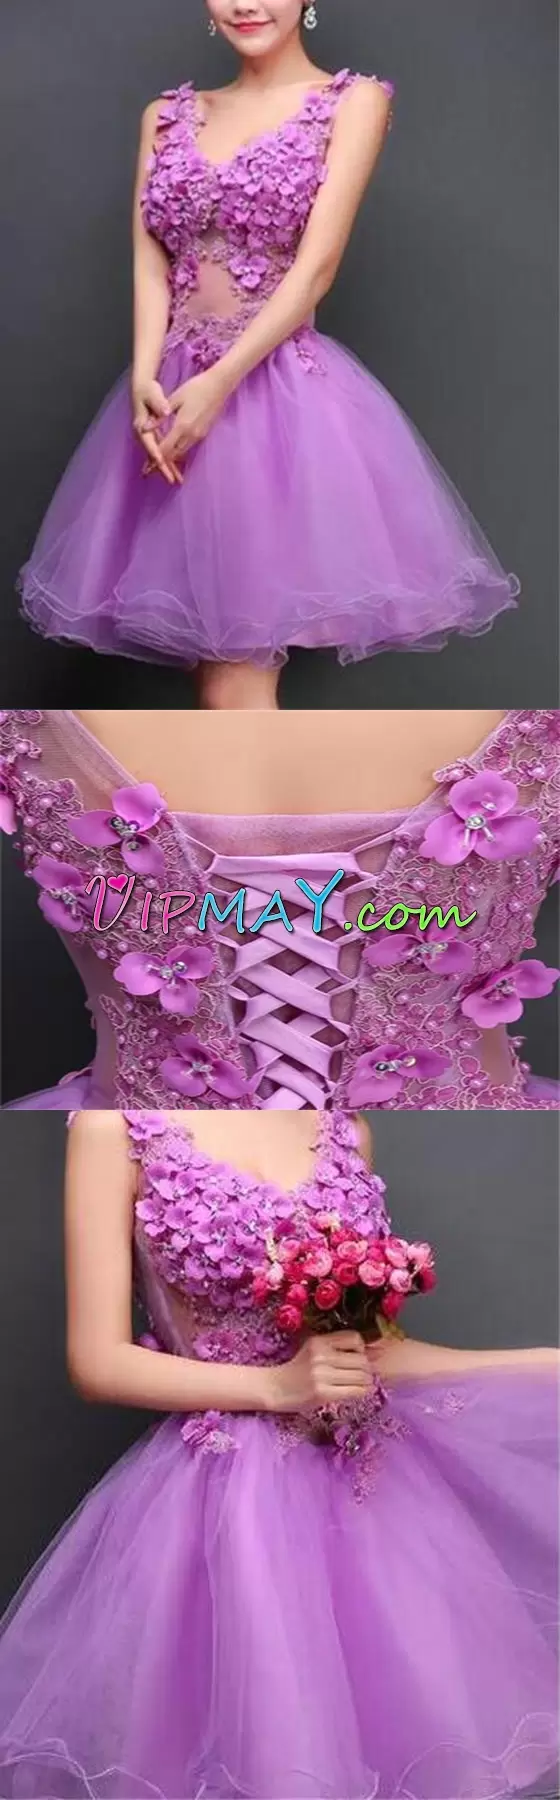 Lilac Sleeveless Mini Length Hand Made Flower Lace Up Prom Evening Gown V-neck